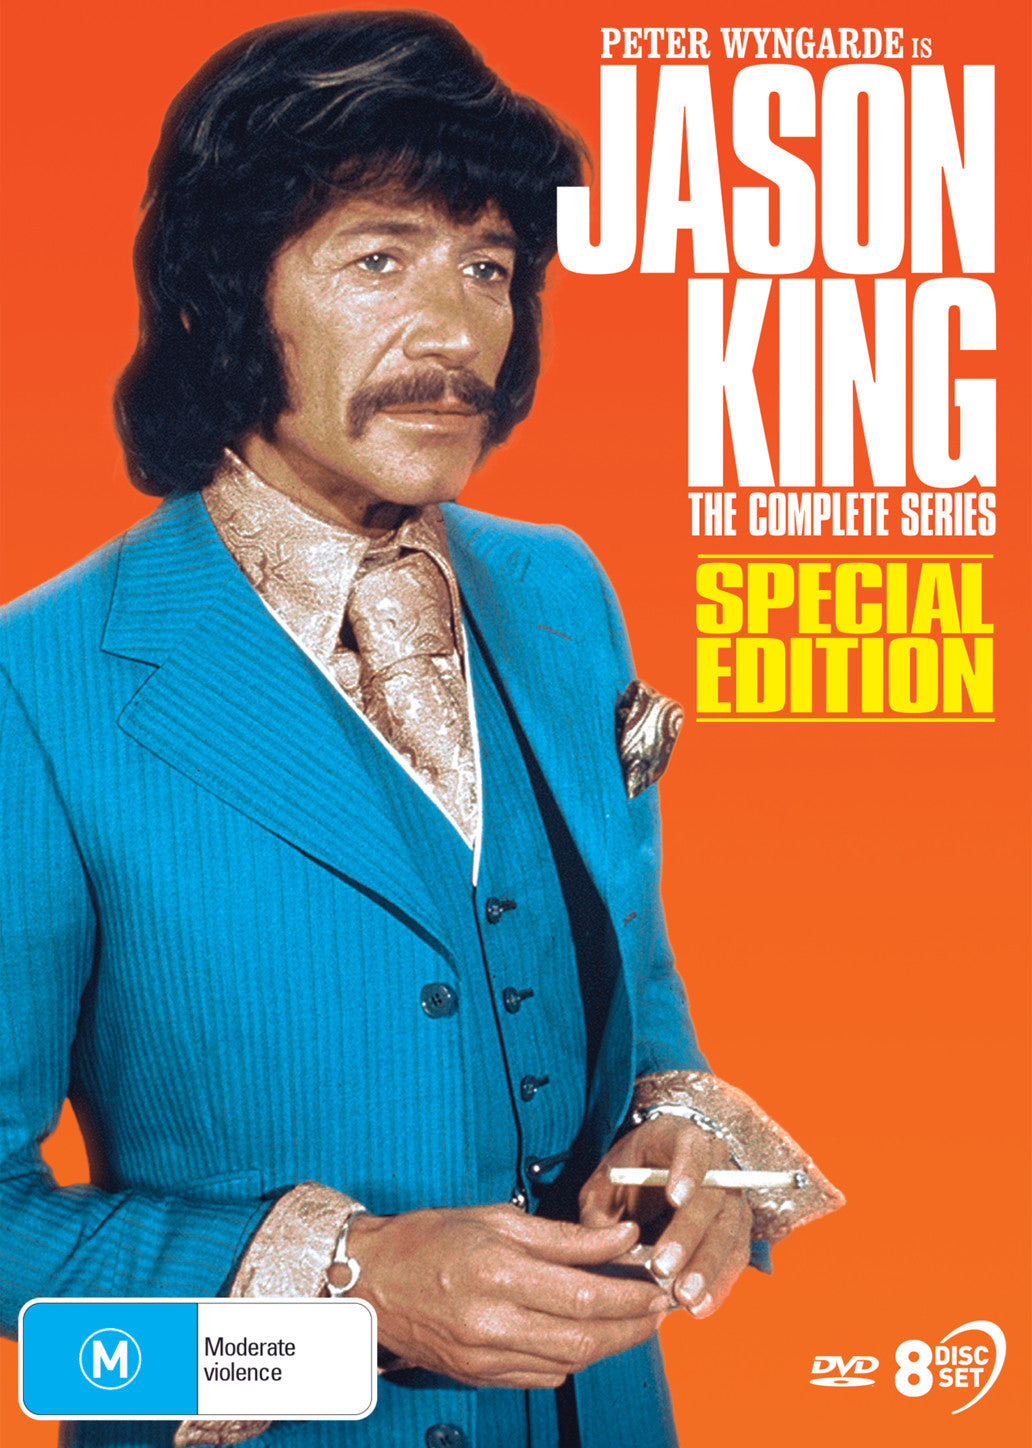 JASON KING - THE COMPLETE SERIES SPECIAL EDITION